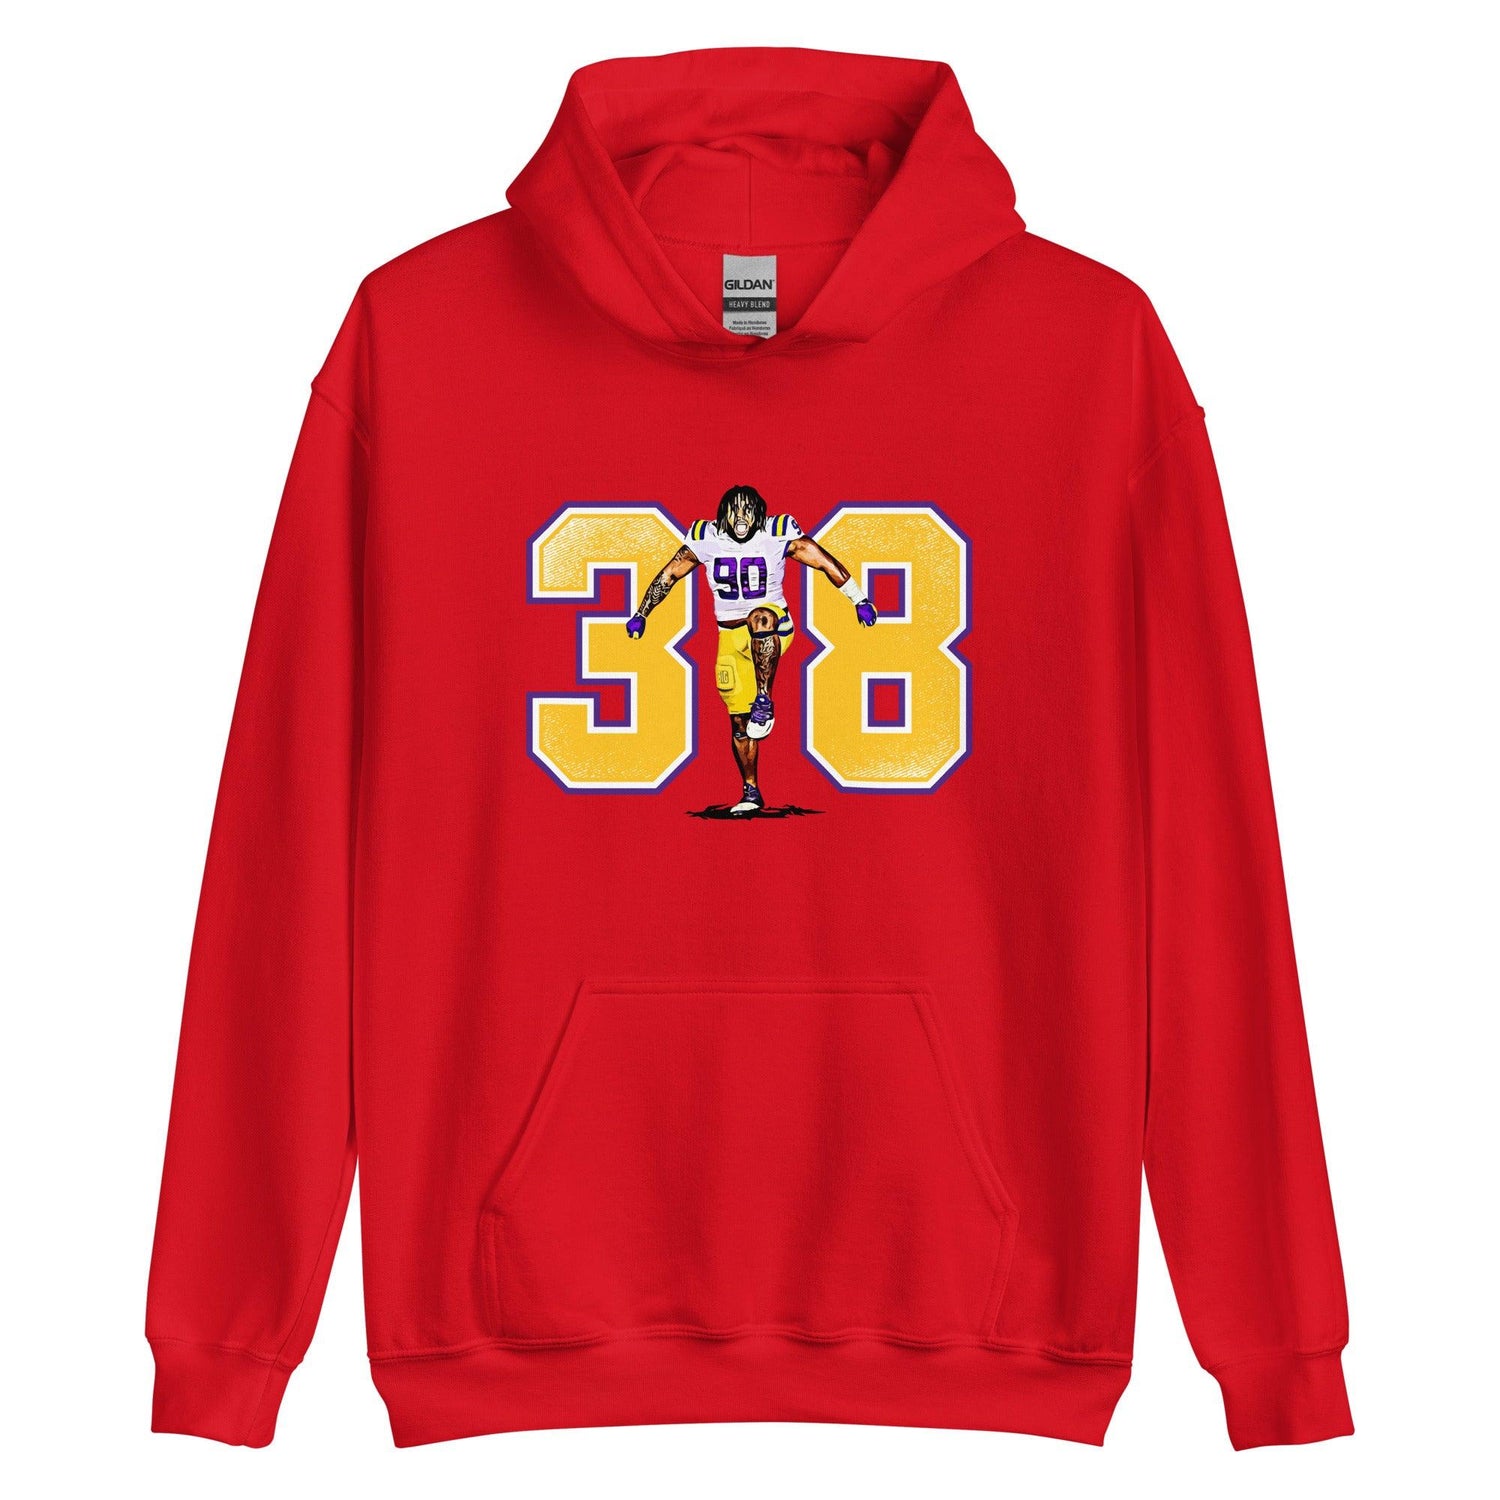 Jacobian Guillory "308" Hoodie - Fan Arch